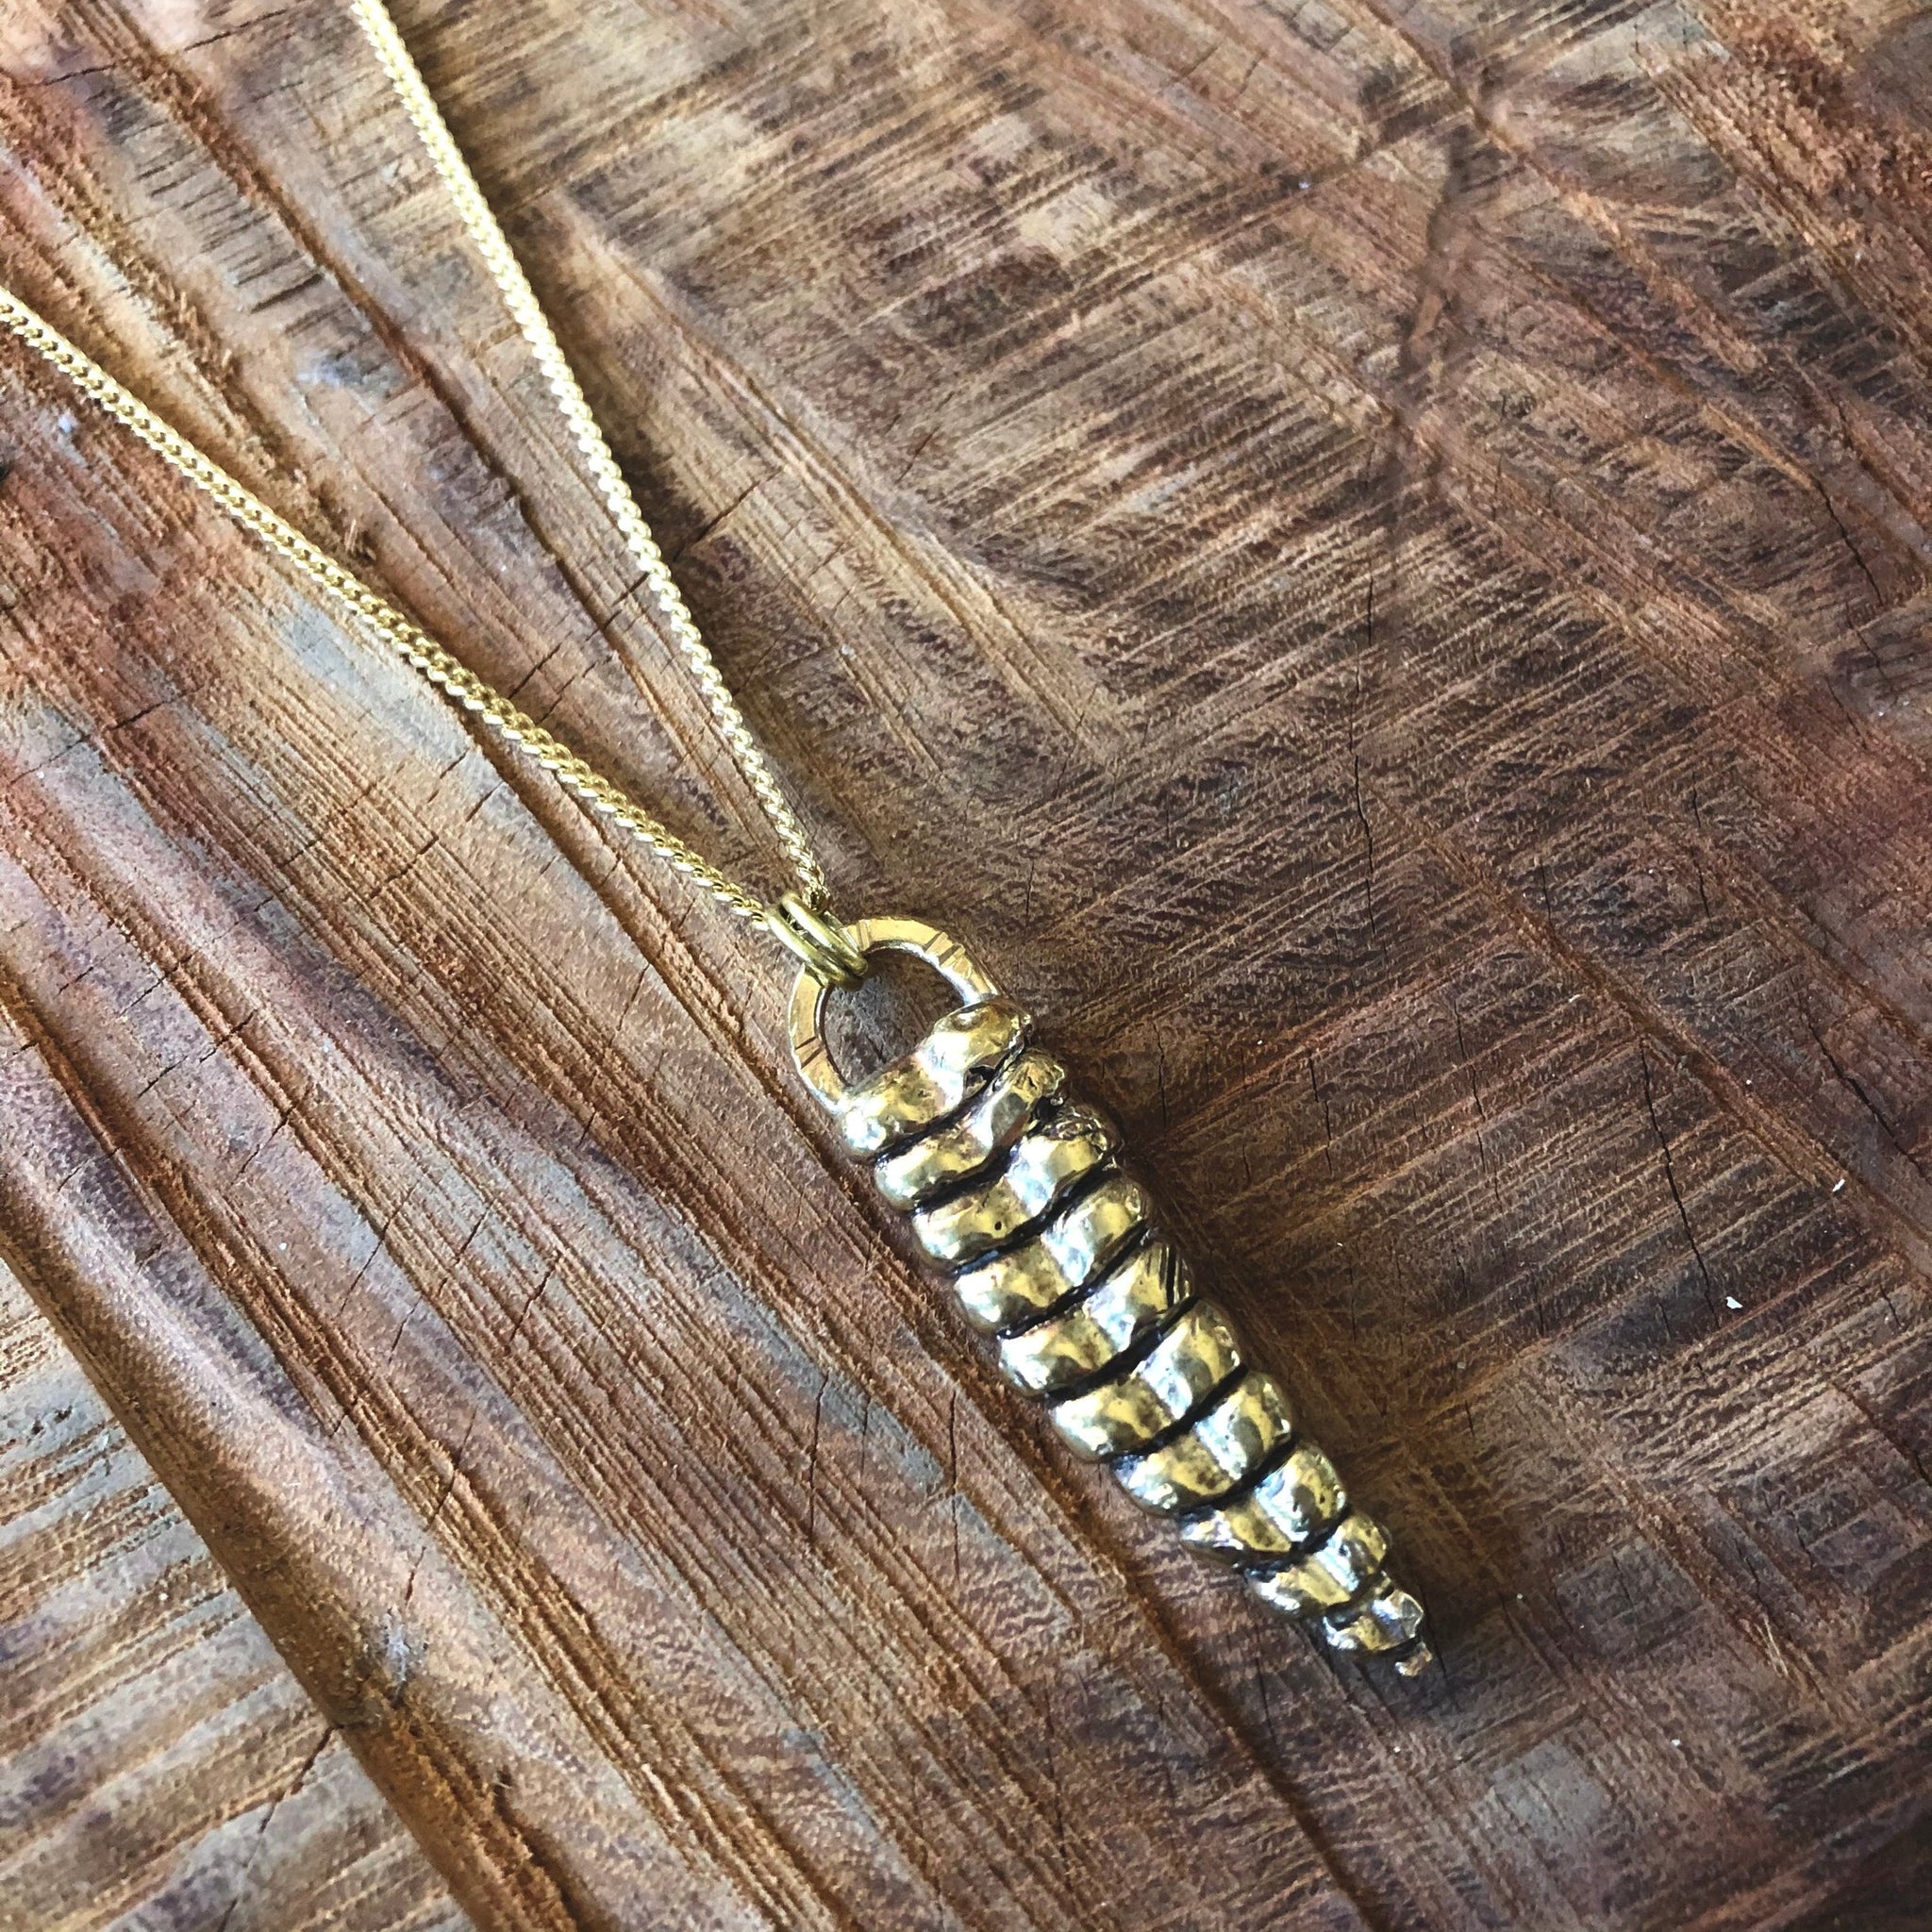 COPPERTIST.WU Rattlesnake Tail Rattle Pendant Necklace 18K Gold Vermeil  Snake Gothic Charm Shakeable Fidget Jewelry with Gift Box for Men Women |  Amazon.com